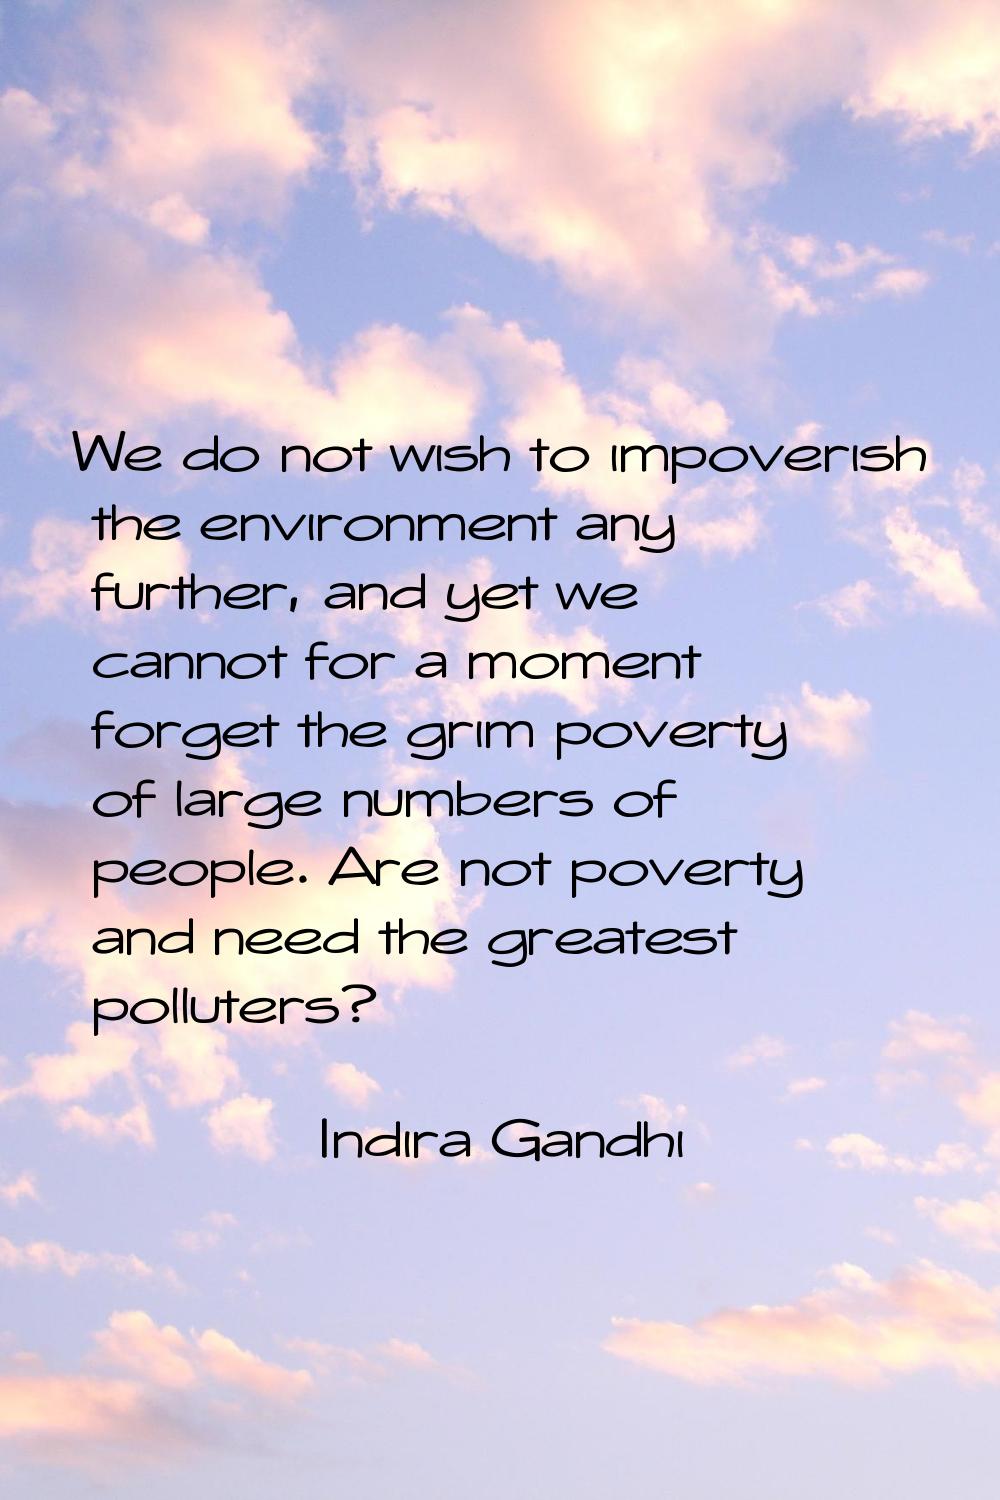 We do not wish to impoverish the environment any further, and yet we cannot for a moment forget the